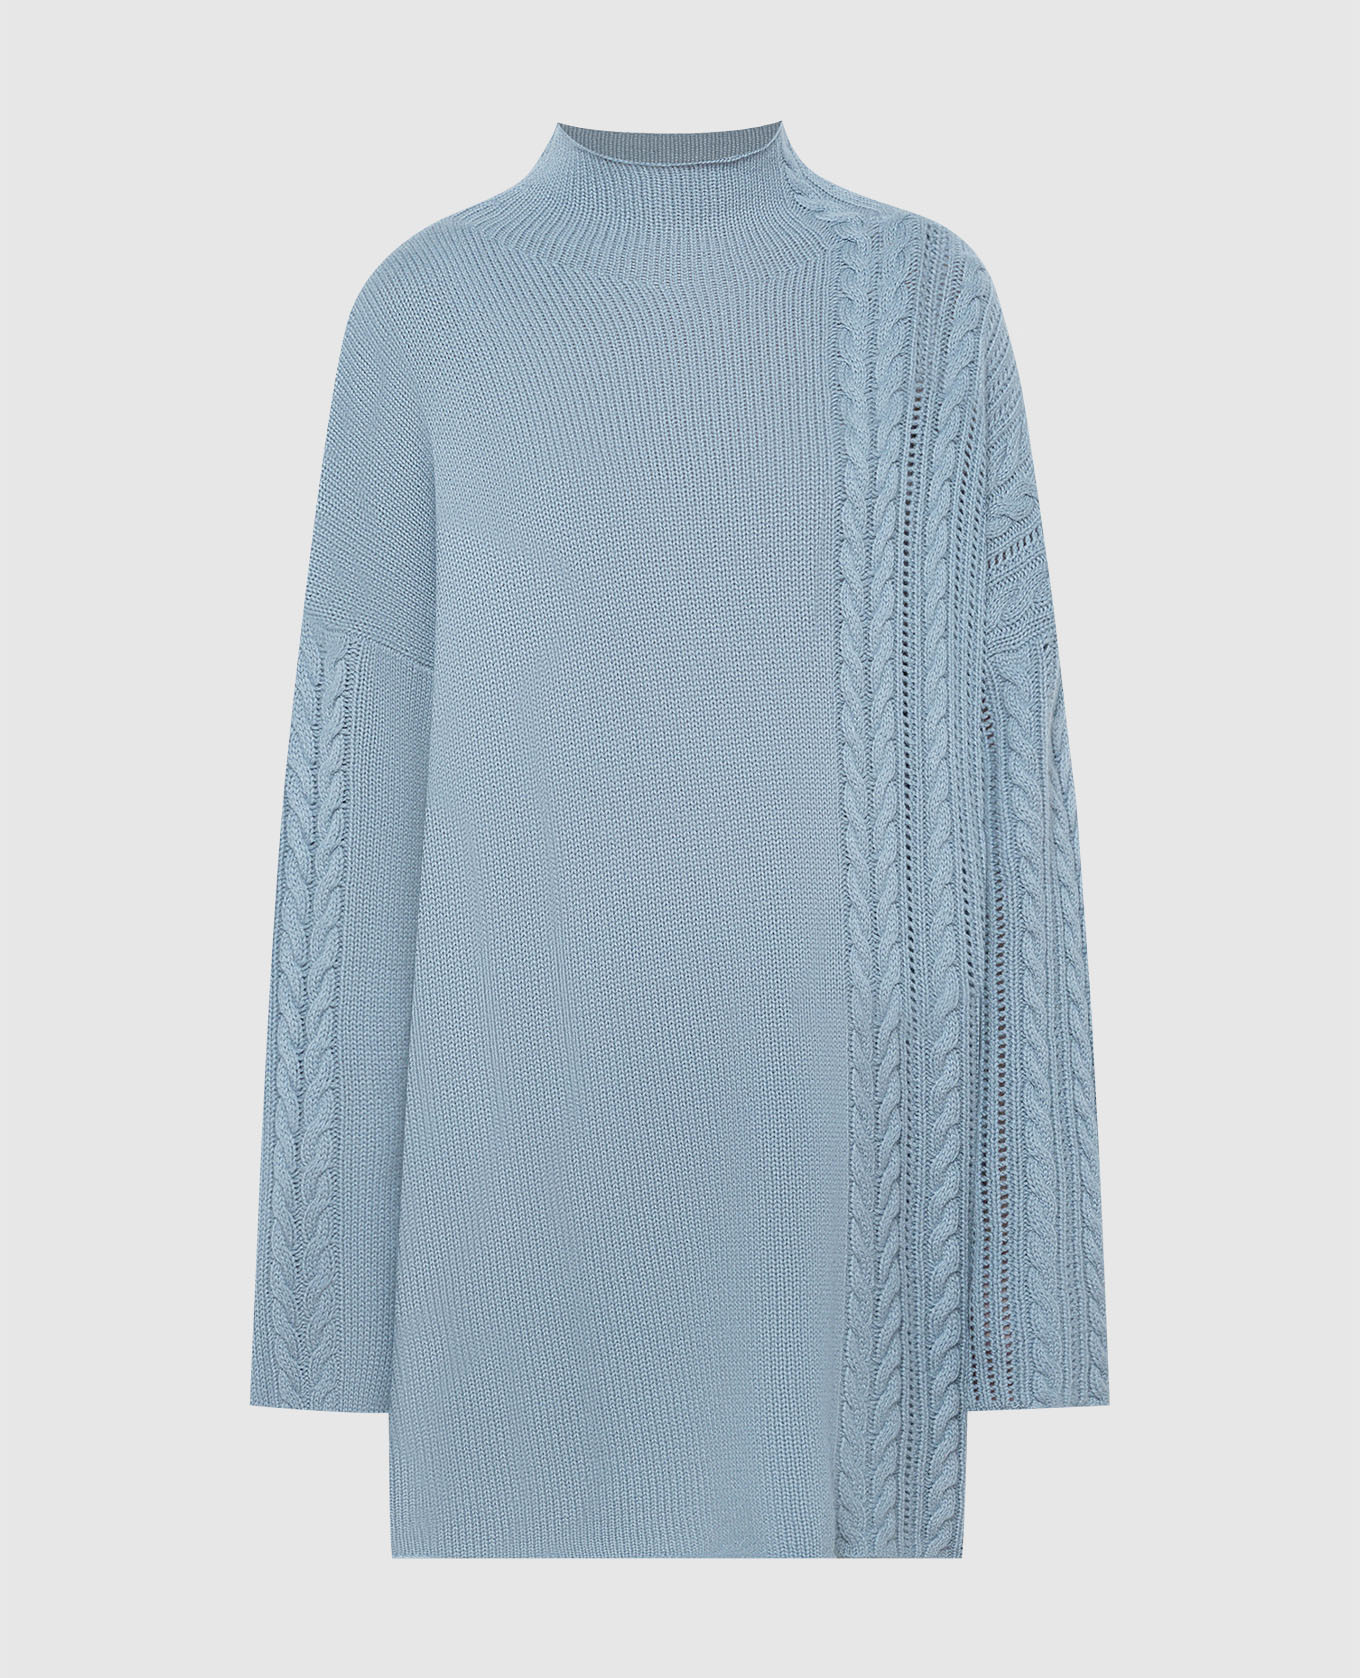 Blue cashmere sweater with a textured pattern